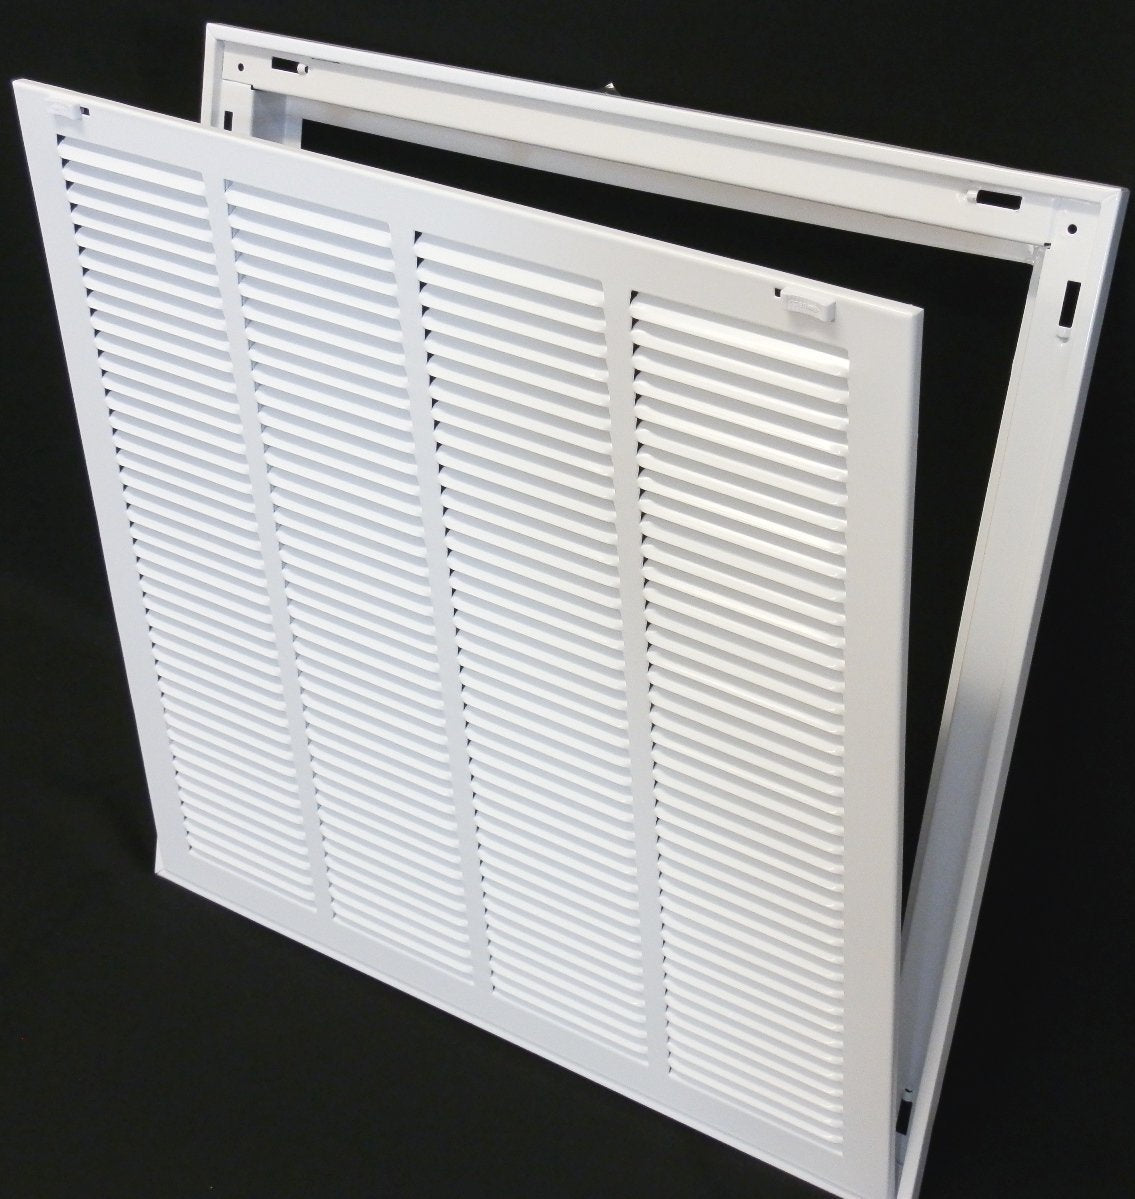 28&quot; X 34&quot; Steel Return Air Filter Grille for 1&quot; Filter - Removable Frame - [Outer Dimensions: 30 5/8&quot; X 36 5/8&quot;]